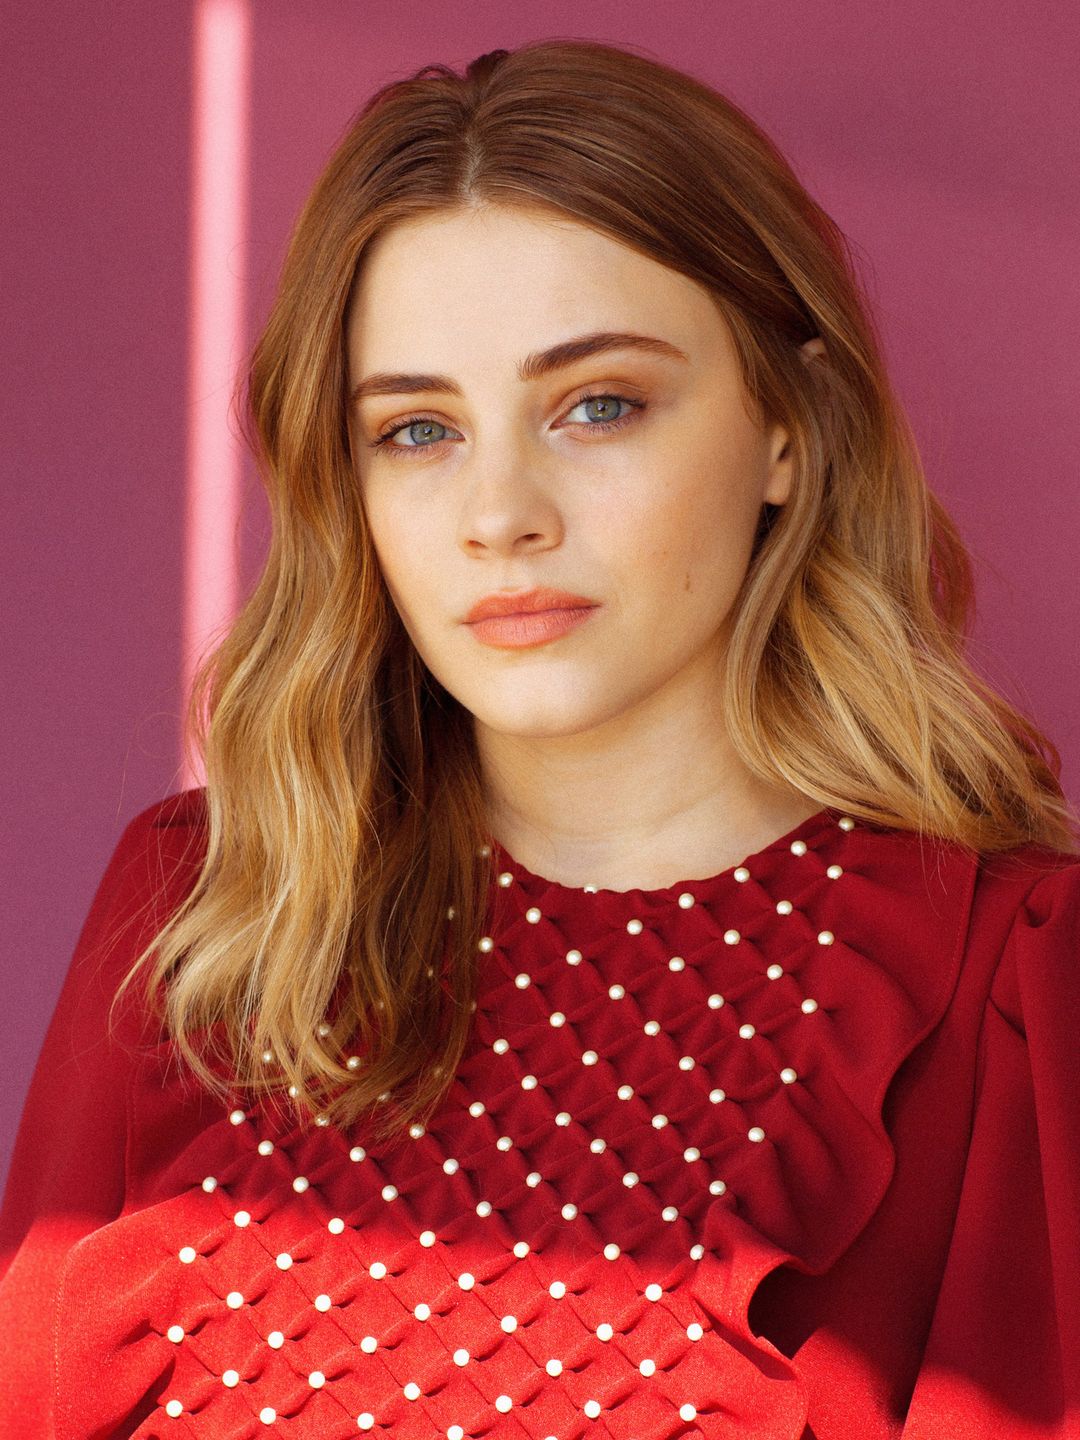 Josephine Langford who is her mother